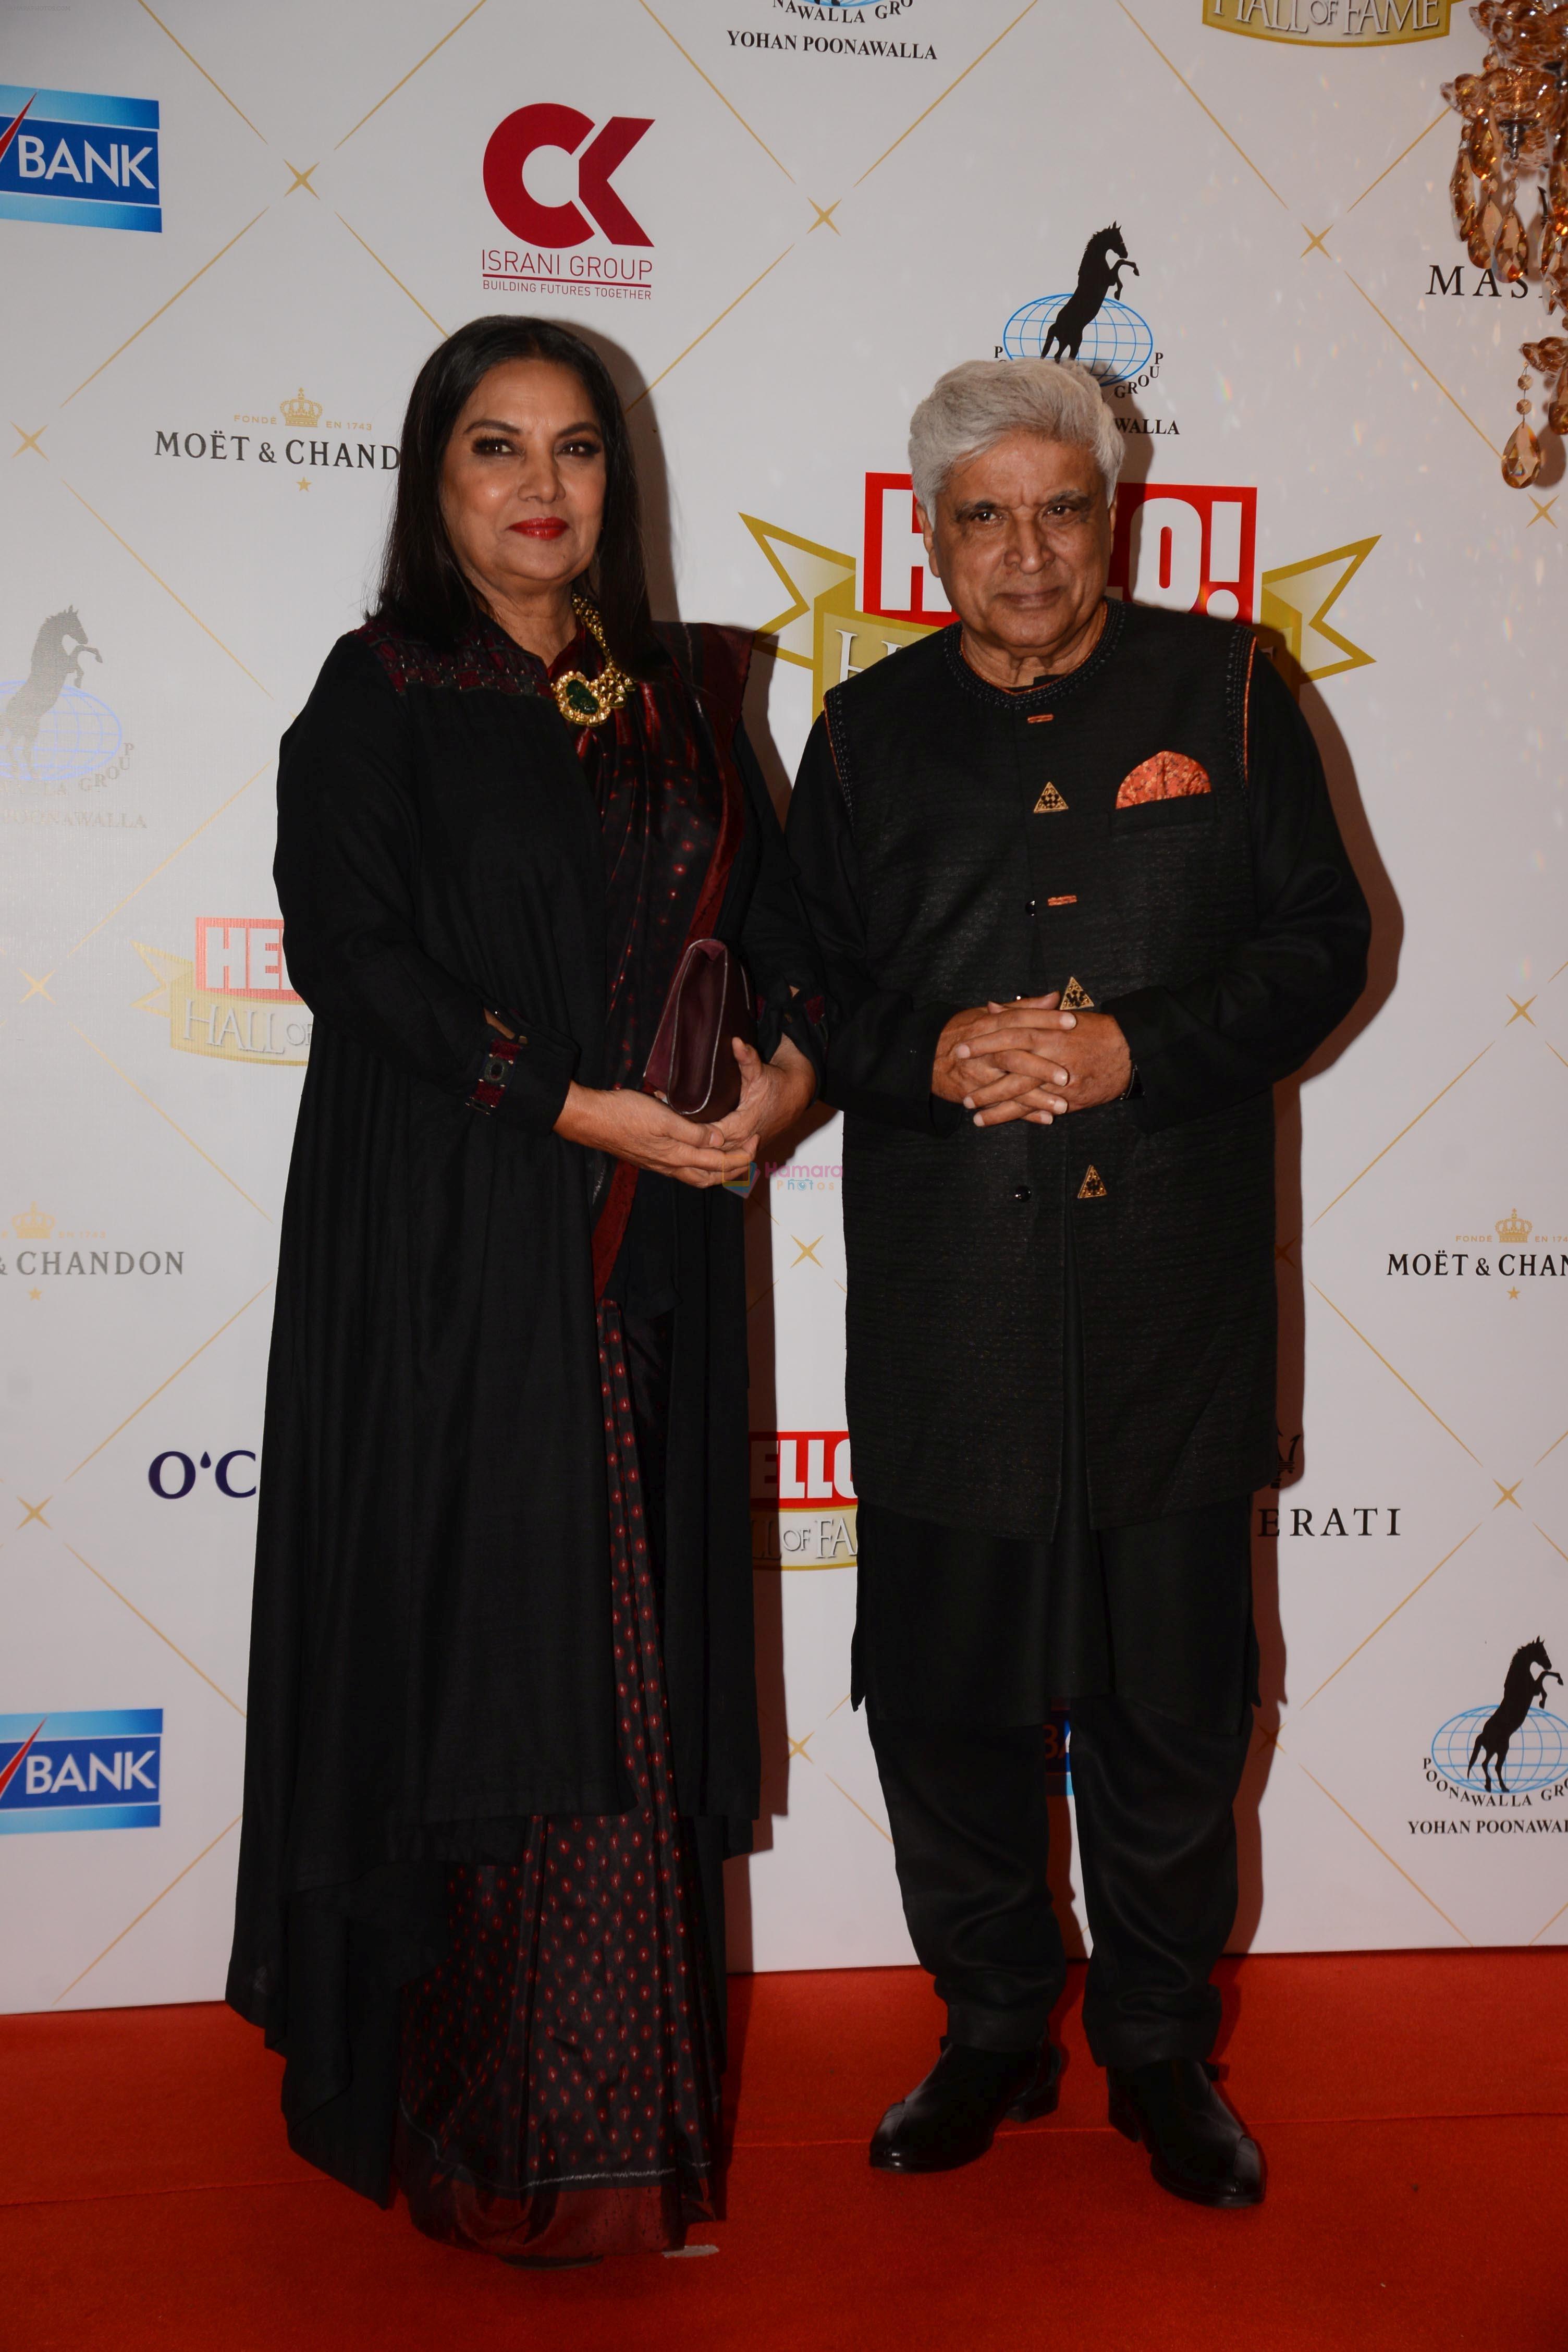 Shabana Azmi, Javed Akhtar at the Hello Hall of Fame Awards in St Regis hotel on 18th March 2019